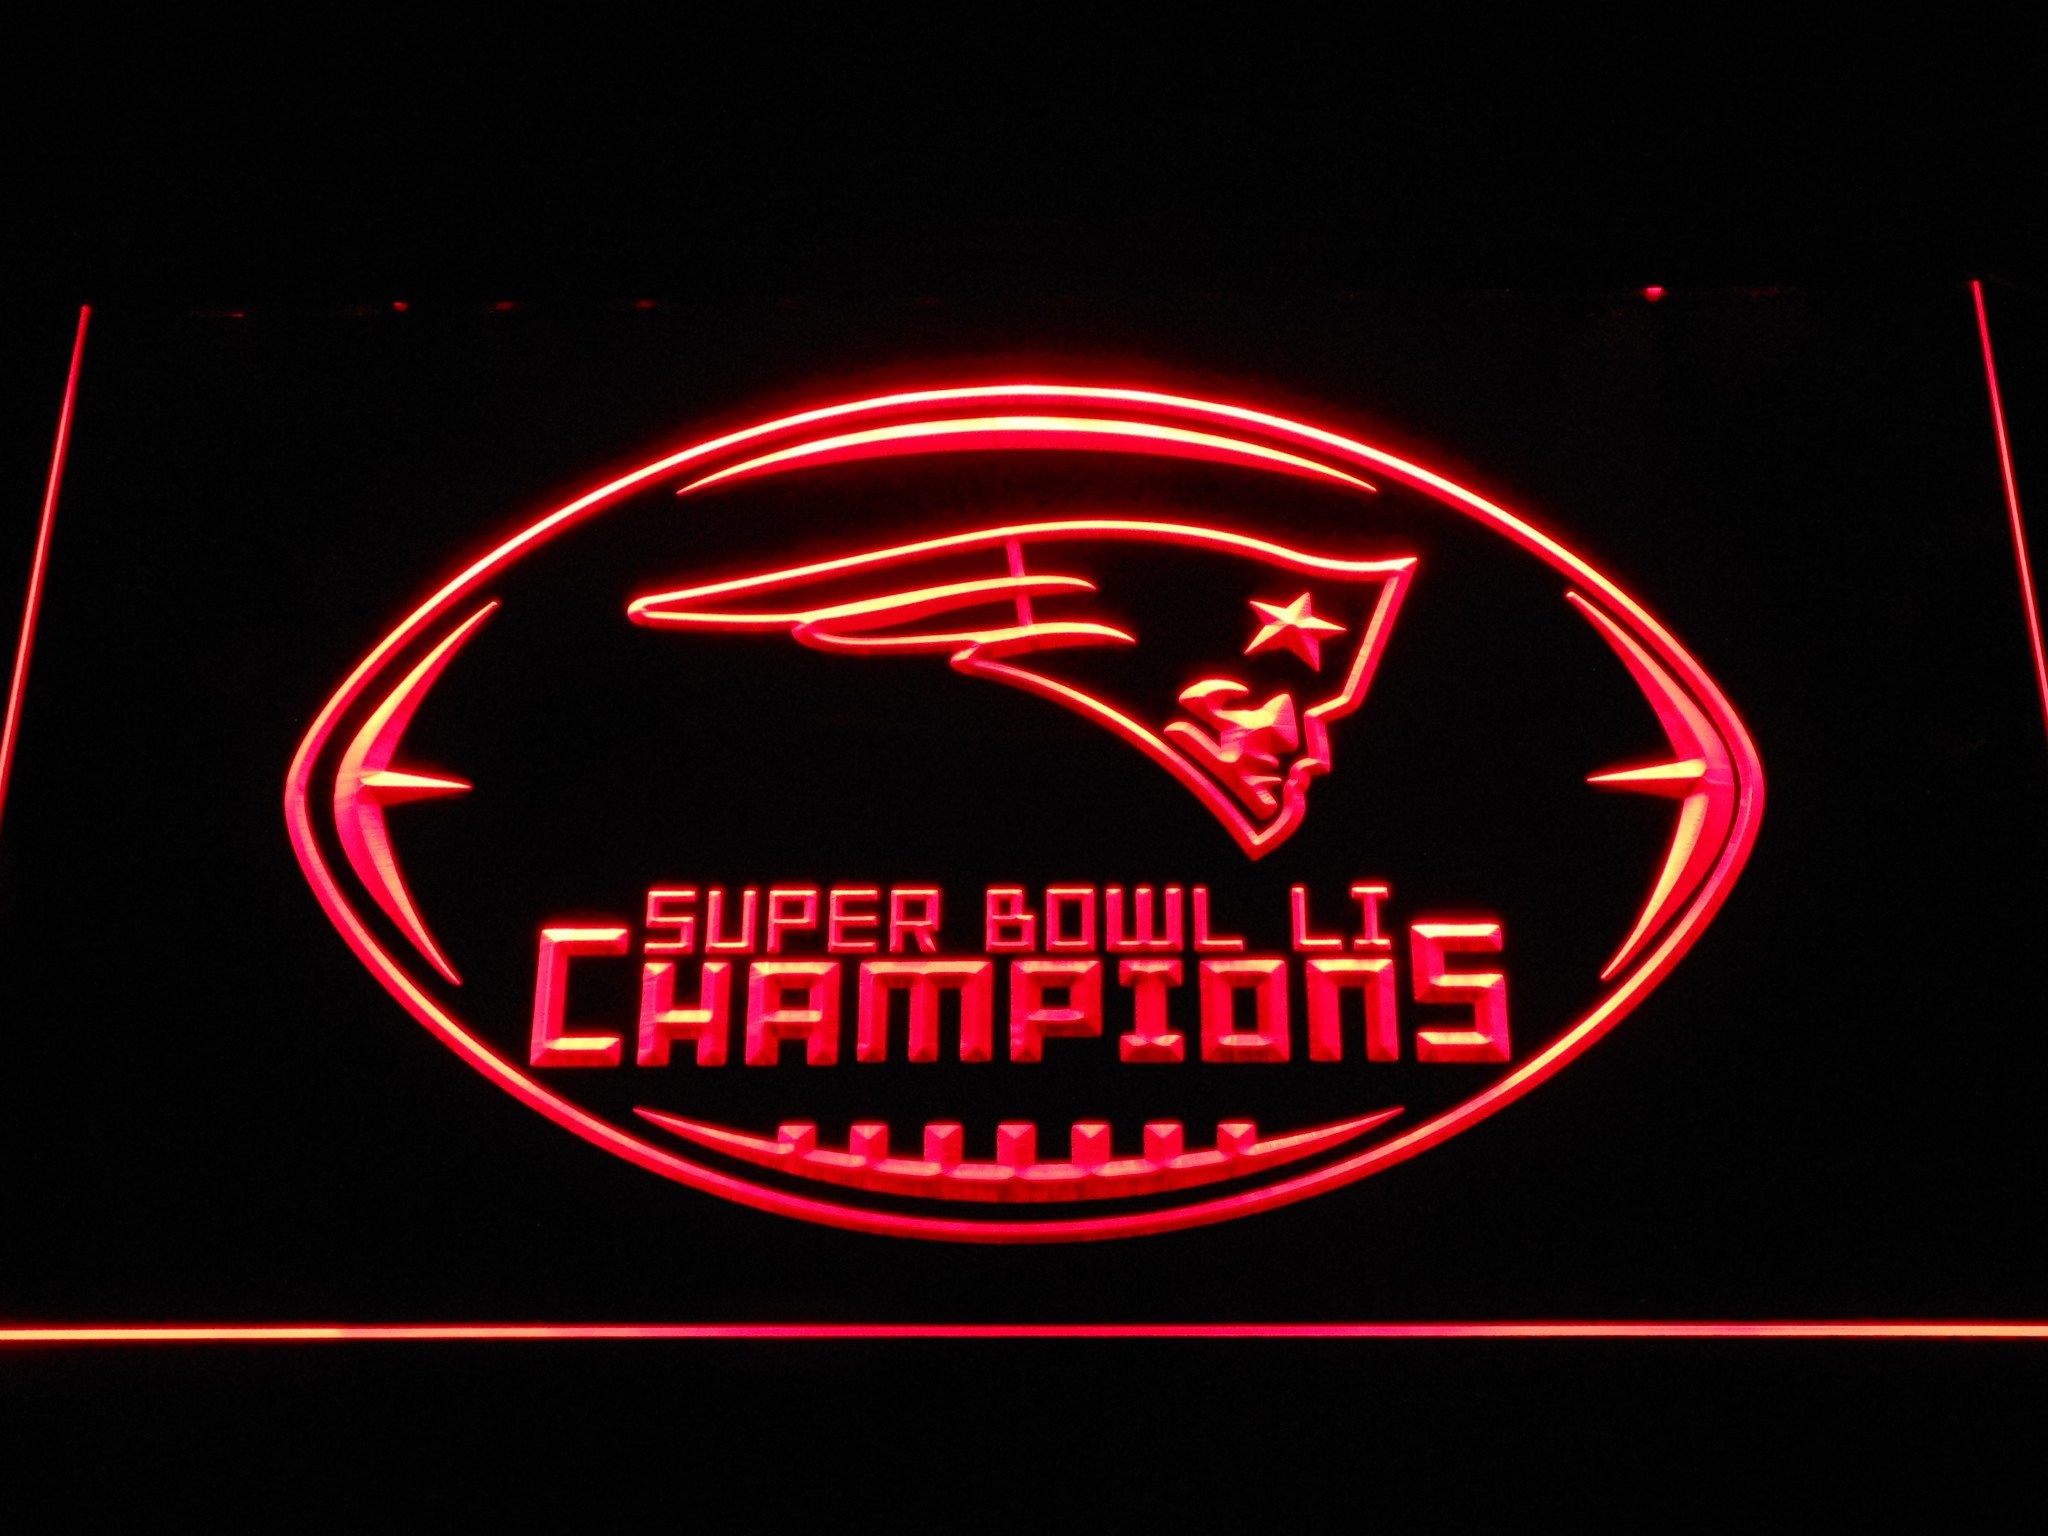 2048x1536 New England Patriots Super Bowl 51 Champions LED Neon Sign | SafeSpecial